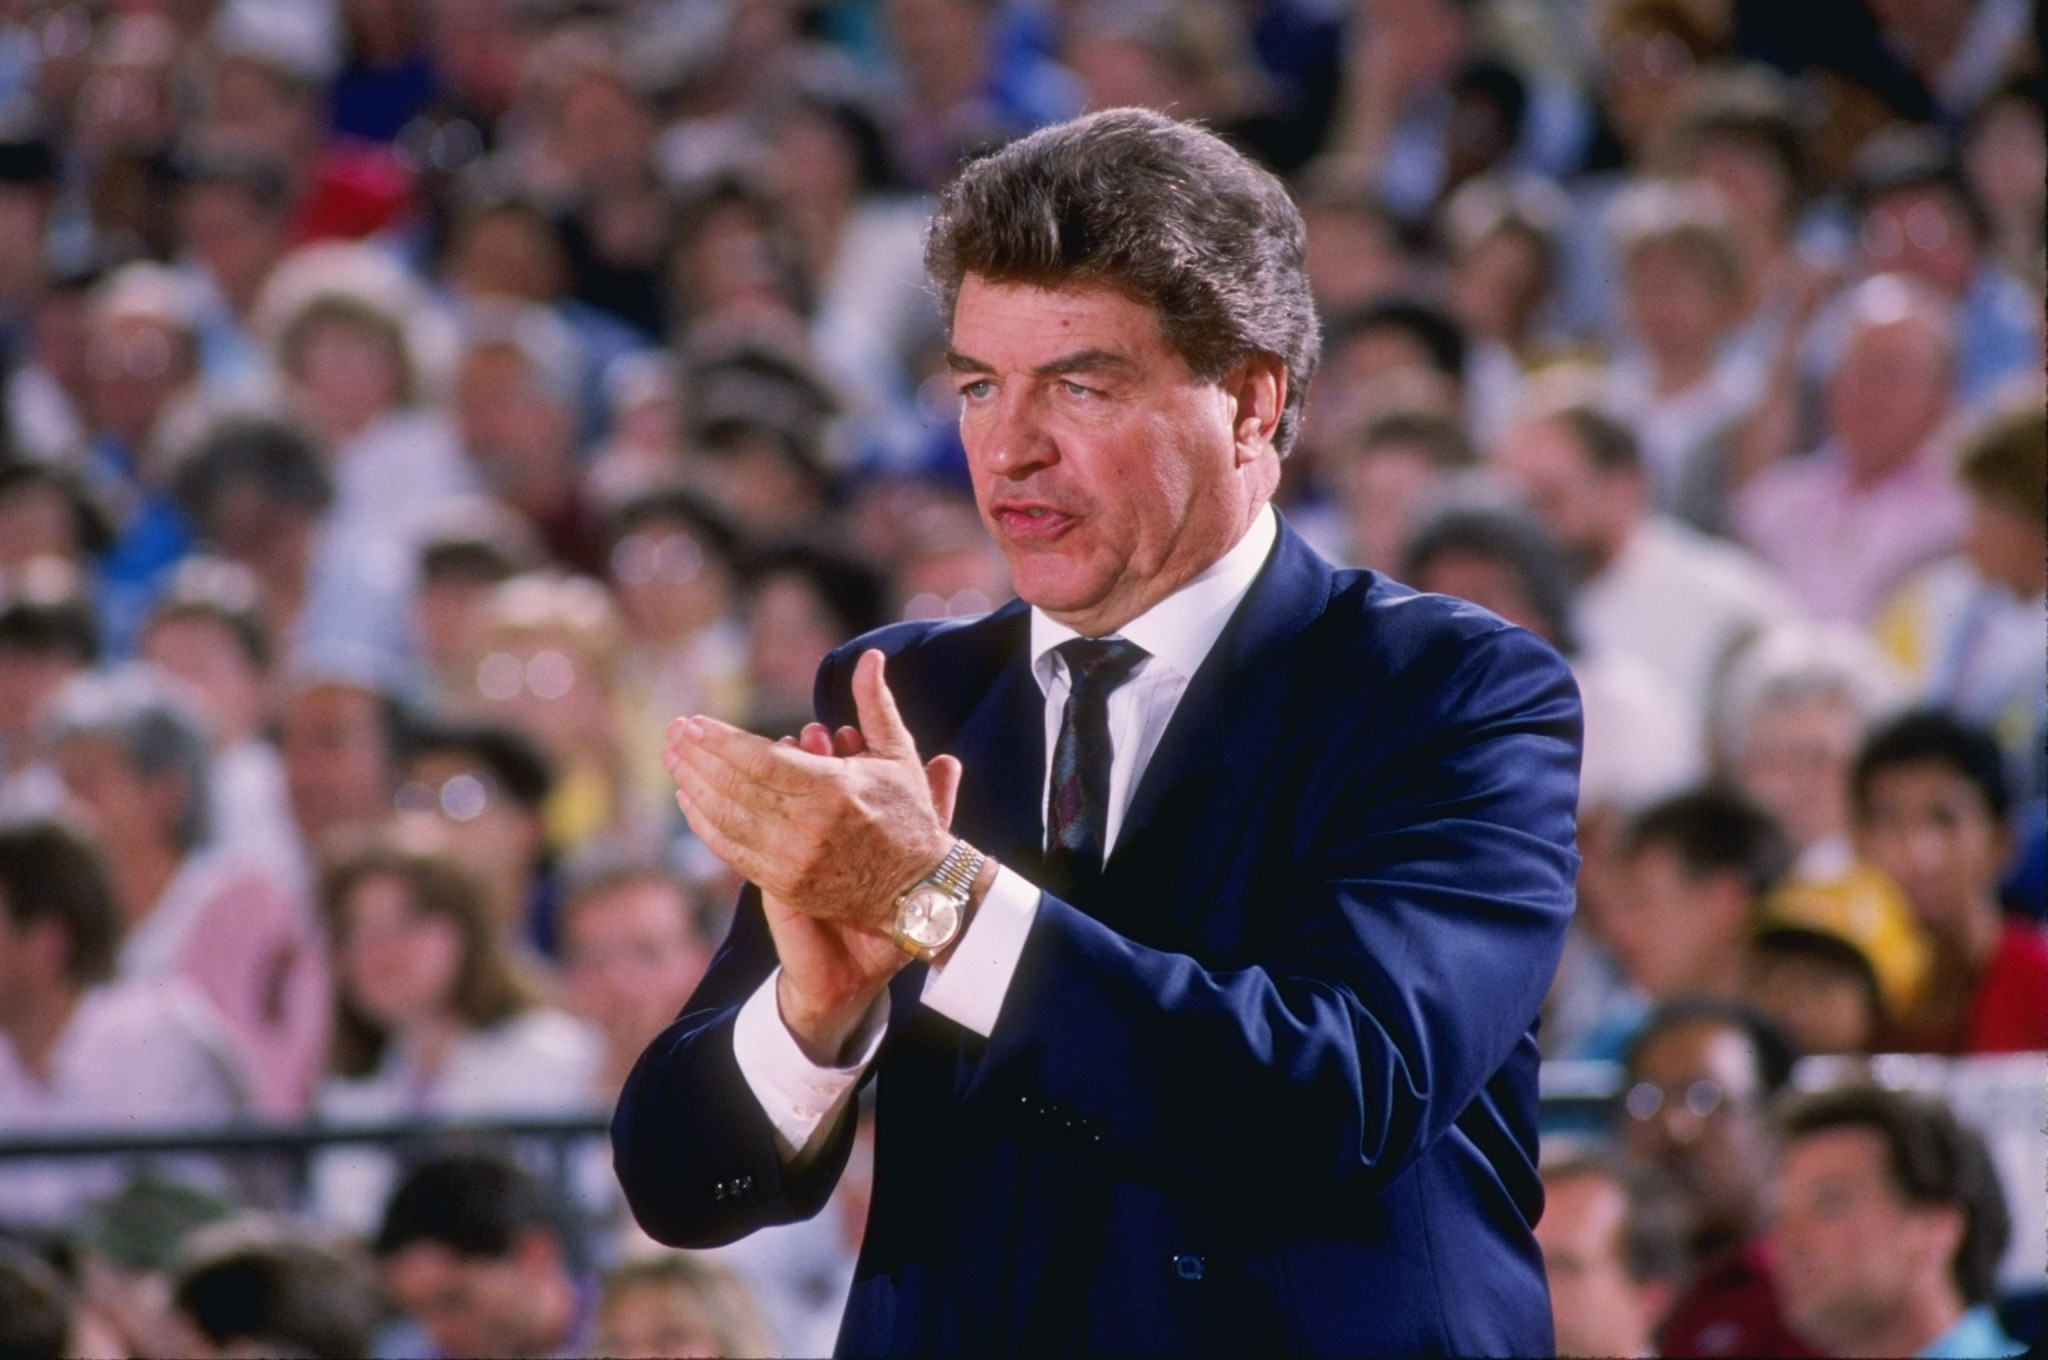 "Dream Team" coach Daly posthumously inducted into 2021 FIBA Hall of Fame